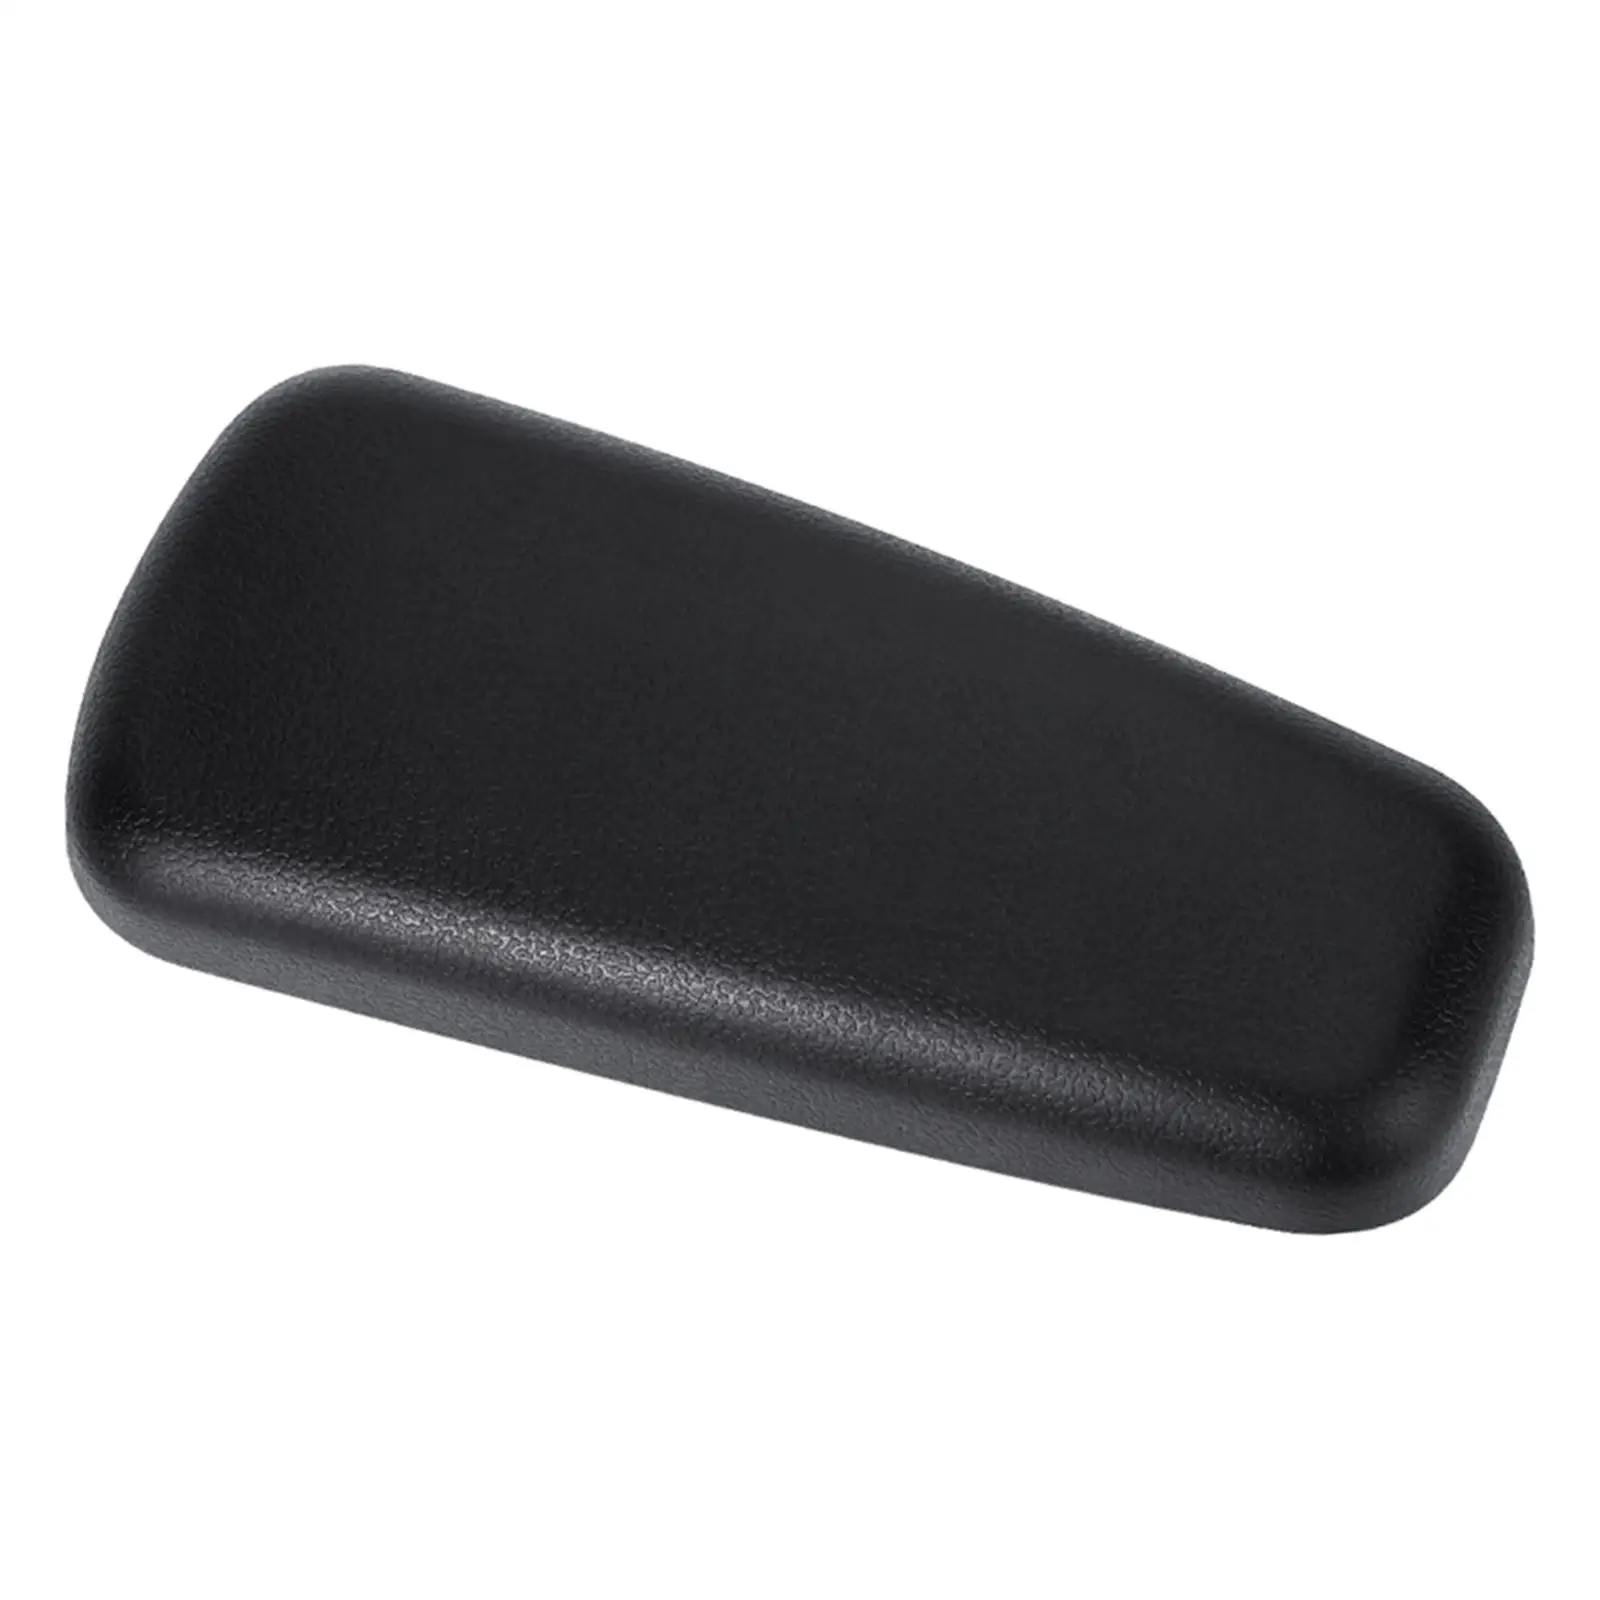 Car Knee Pad Car Armrest Cushion Elbow Rest Soft Pad Support Comfortable PU Leather Auto Car Armrest Pad for Driver Side